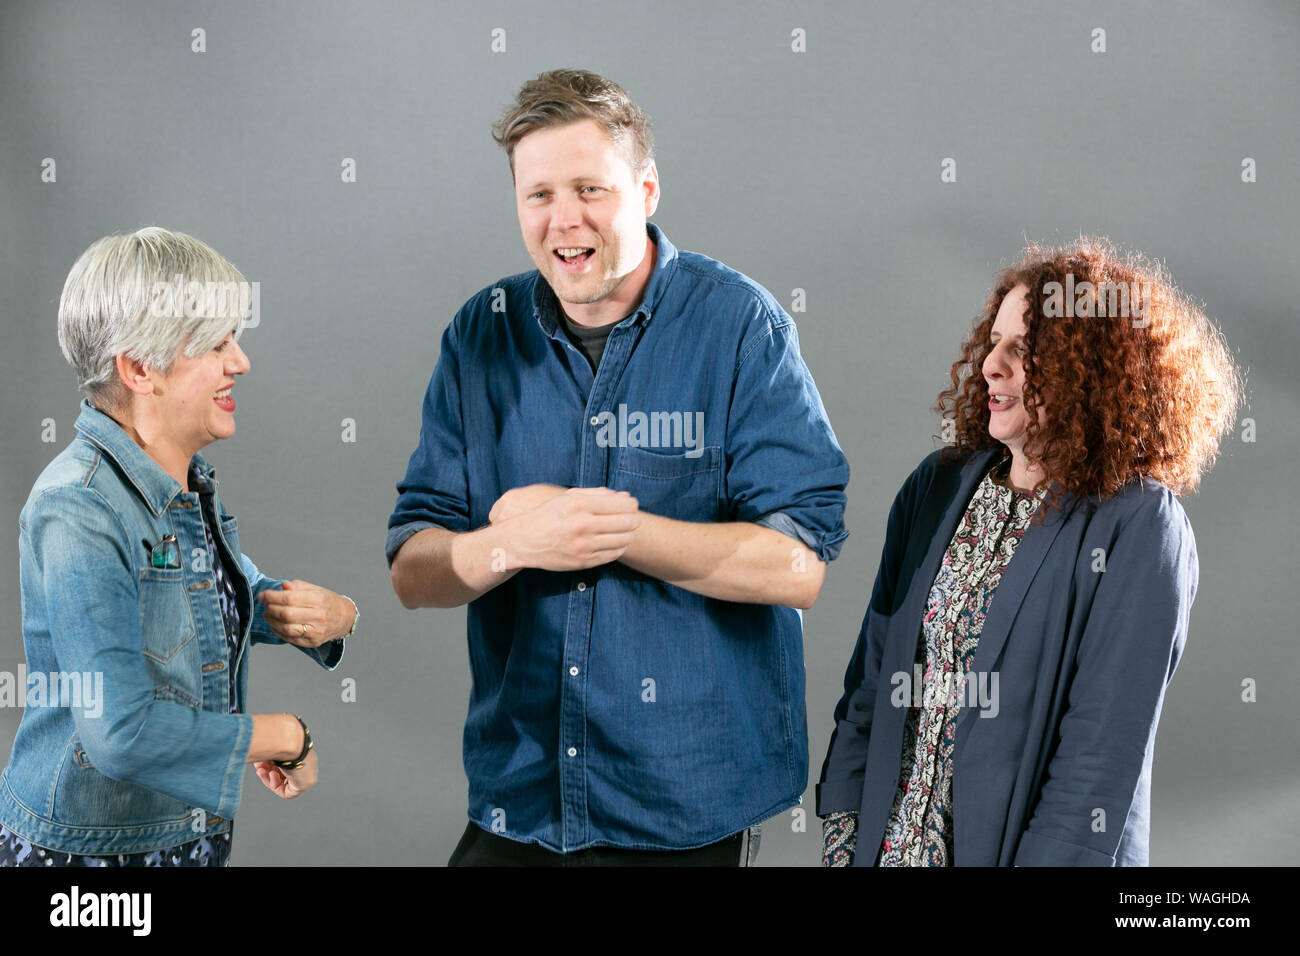 Edinburgh, Scotland, UK, 20 Aug 2019. Pictured at the Edinburgh Book Festival, L to R, Tracey Thorn, singer, songwriter and author, Max Porter, 2019 Booker long listed author, Maggie O'Farrell, Irish-British Novelist. Credit: Brian Wilson/Alamy Live News Stock Photo